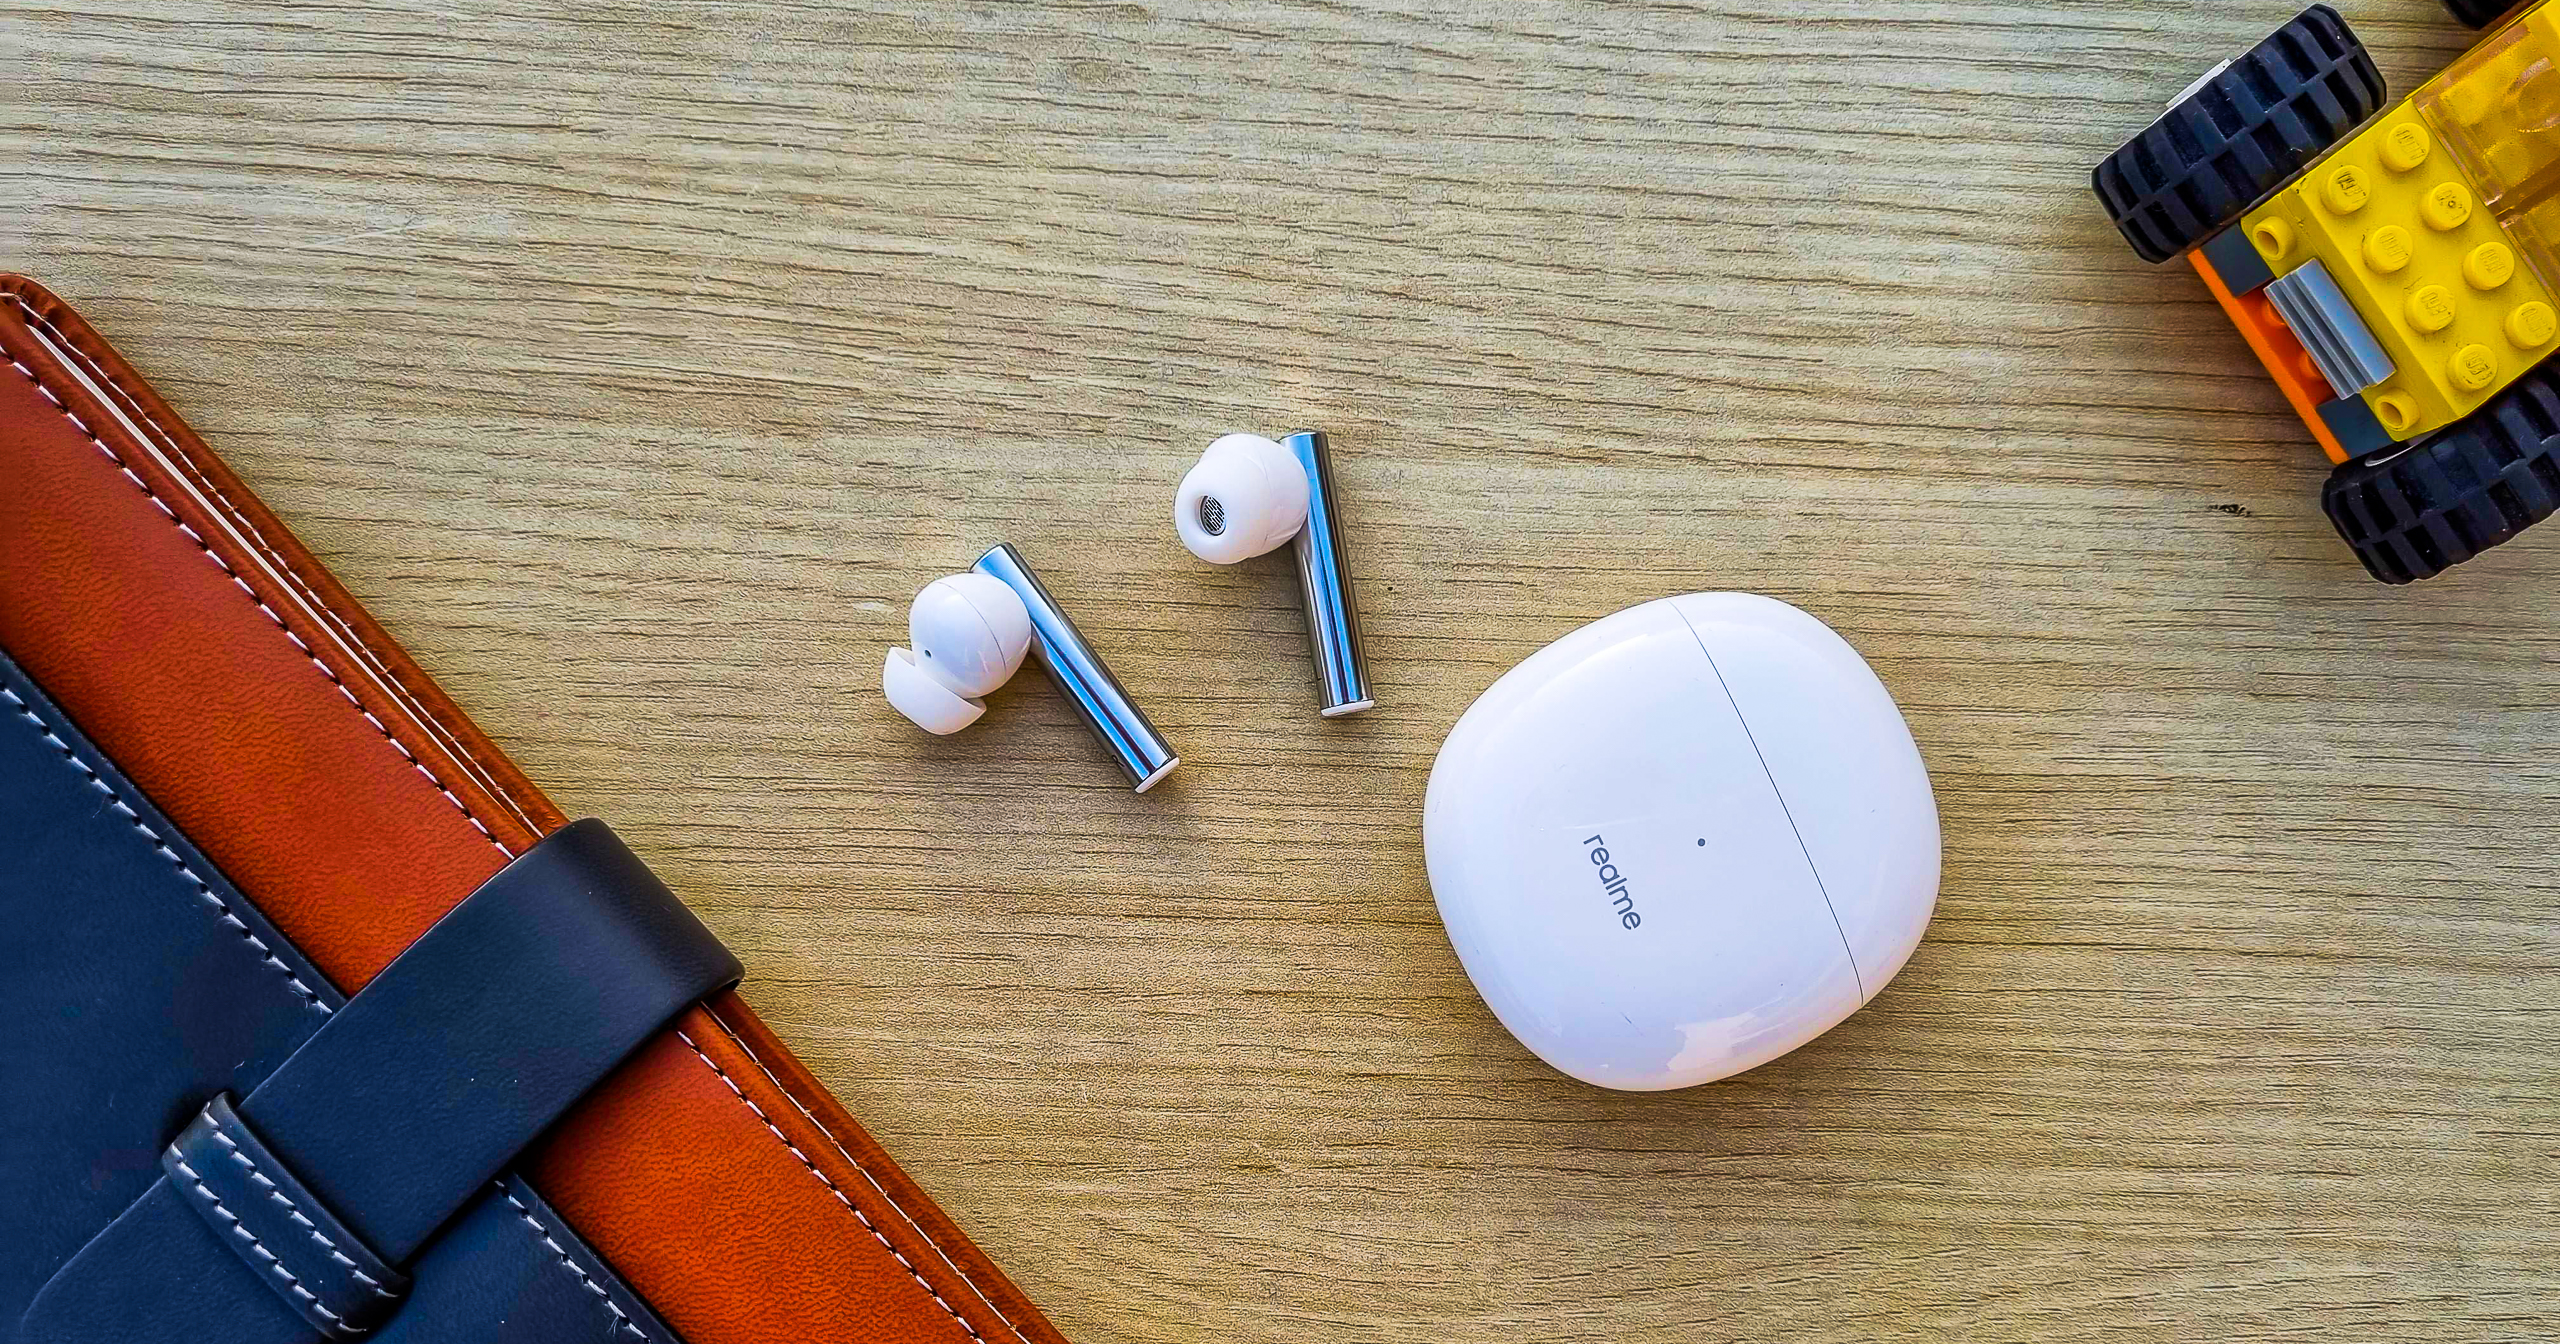 Realme Buds Air 2 review: Solid ANC earbuds made perfect by add-on features